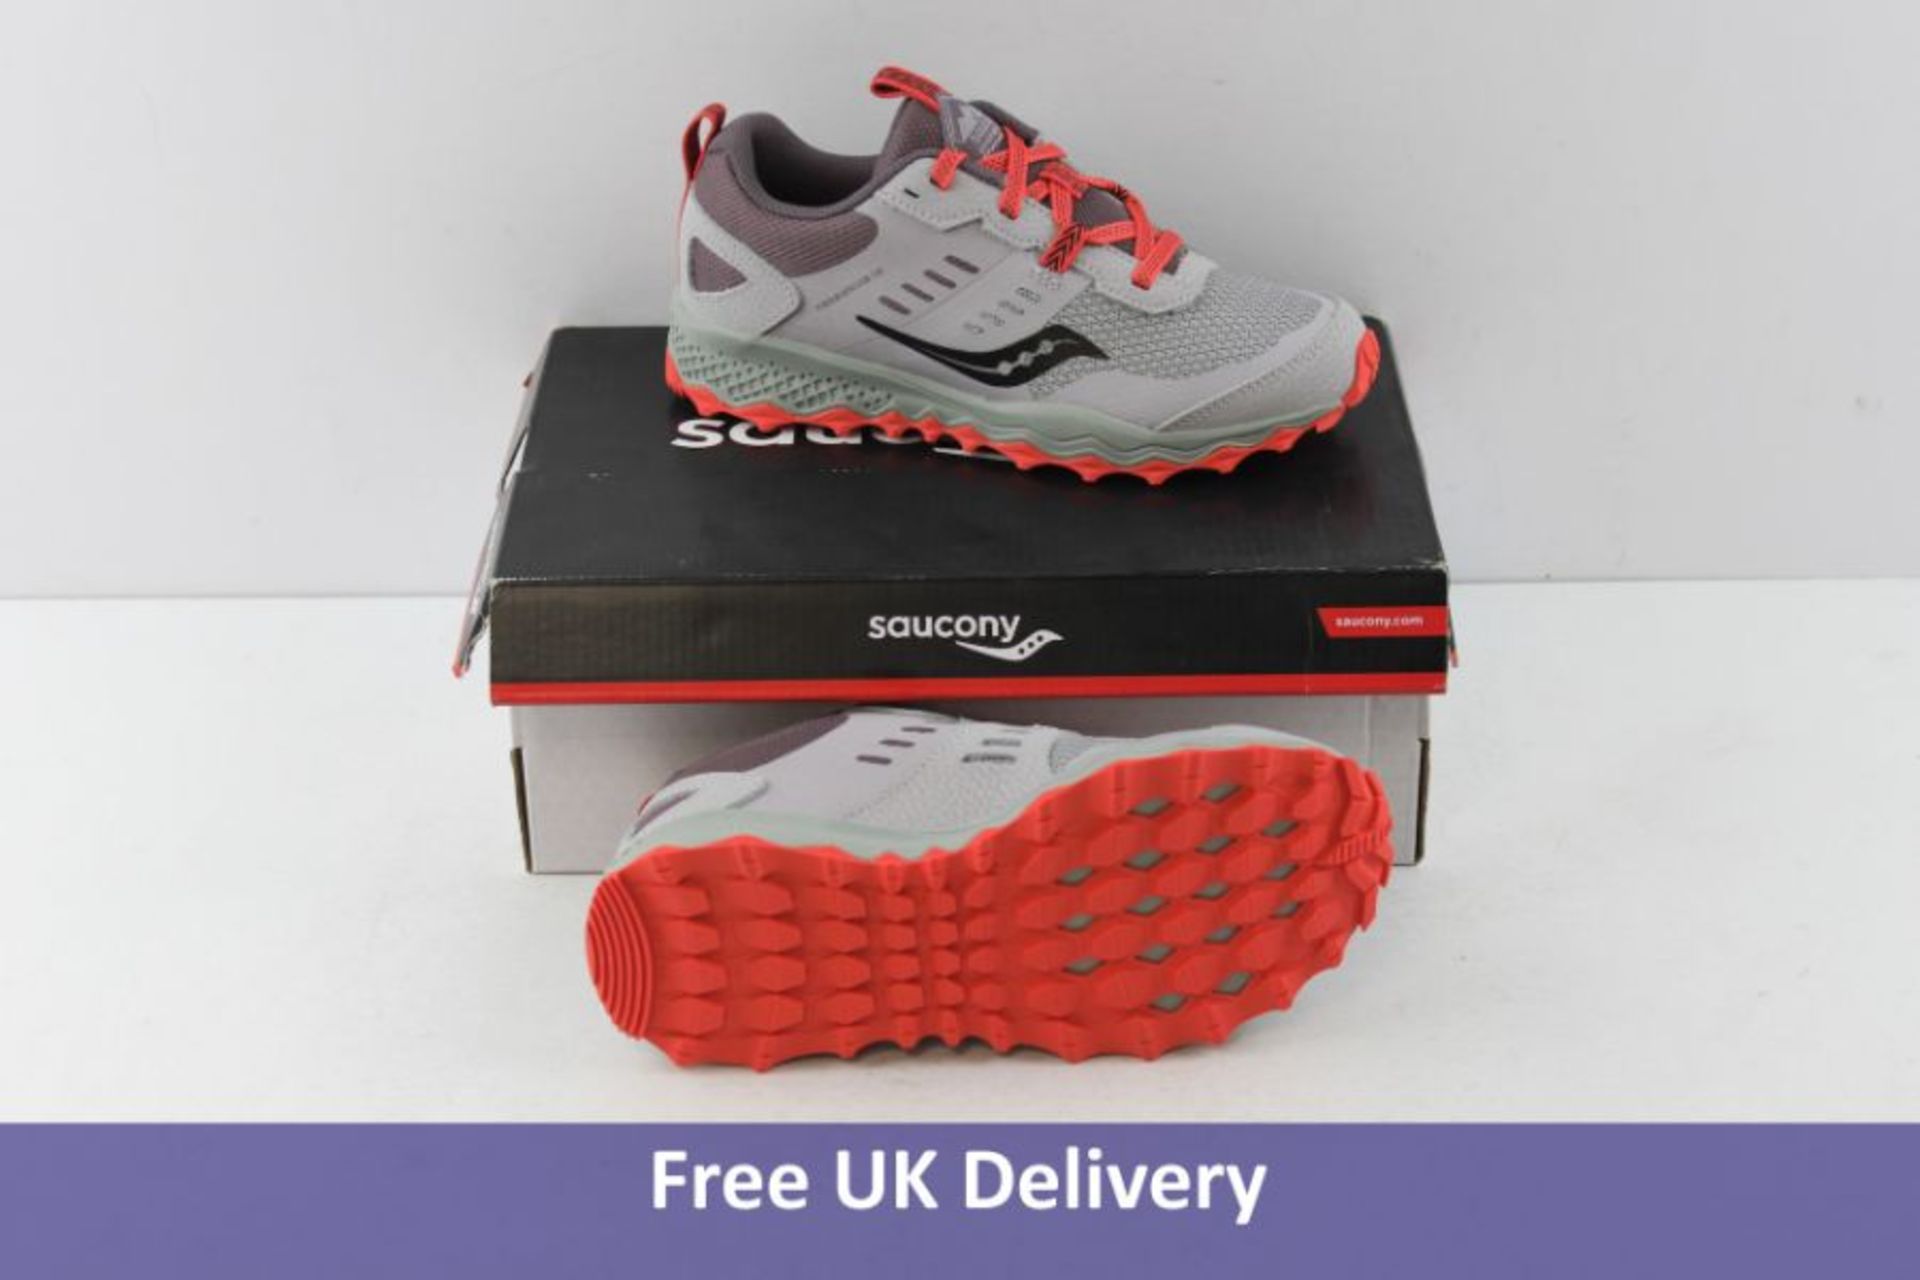 Two pairs of Saucony Girl's Trainers, UK 1